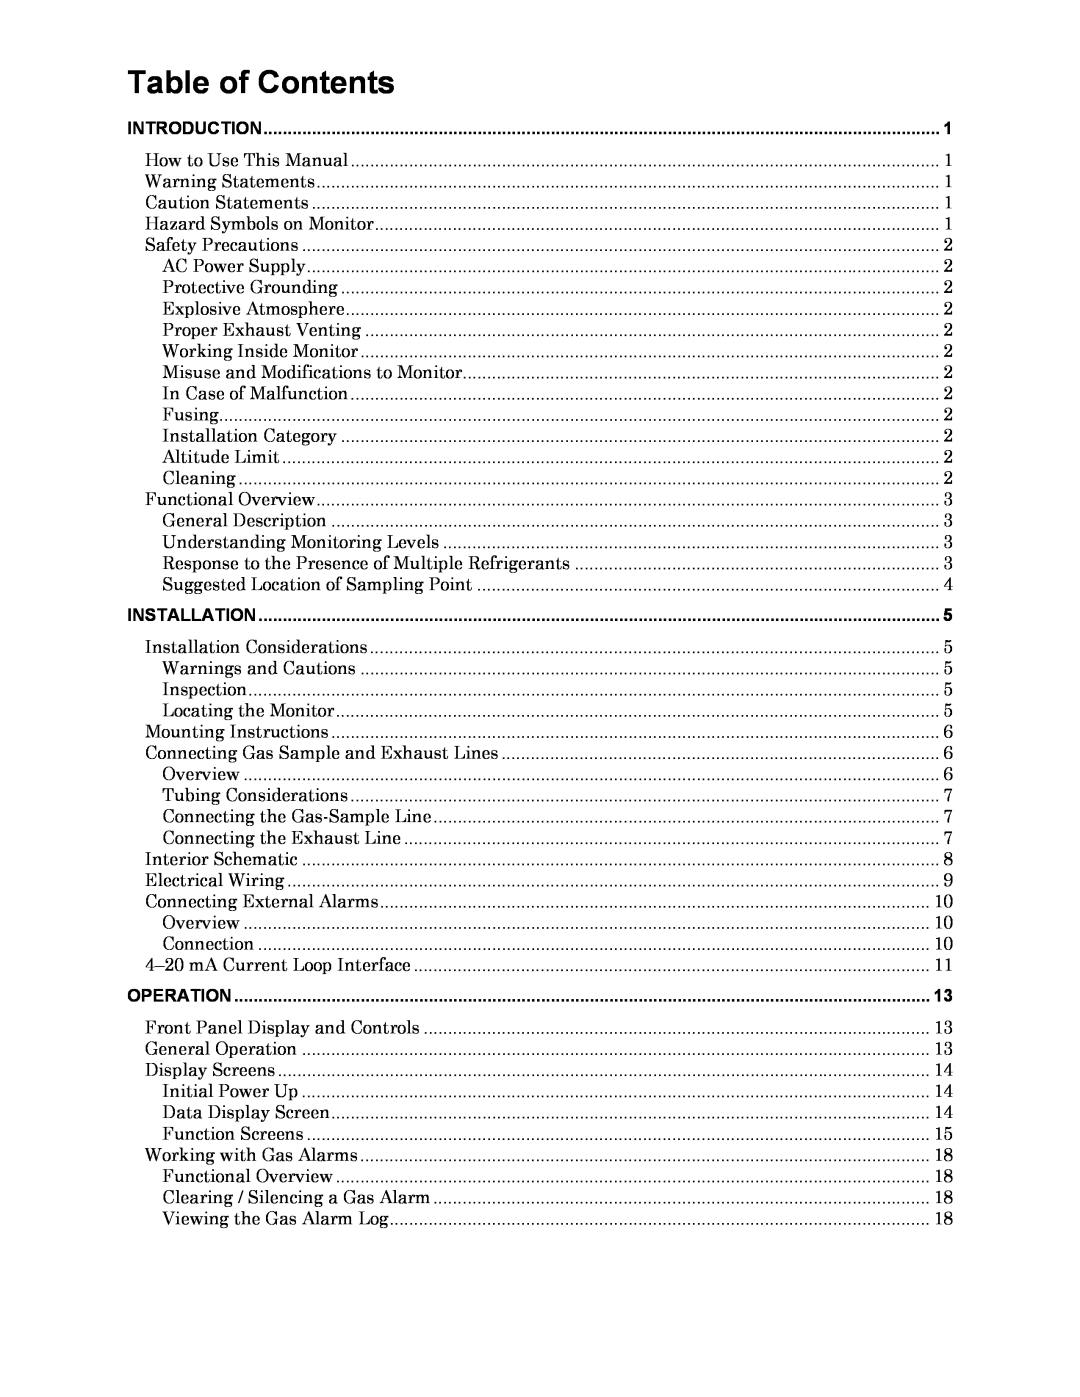 Bacharach 3015-4256 manual Table of Contents 